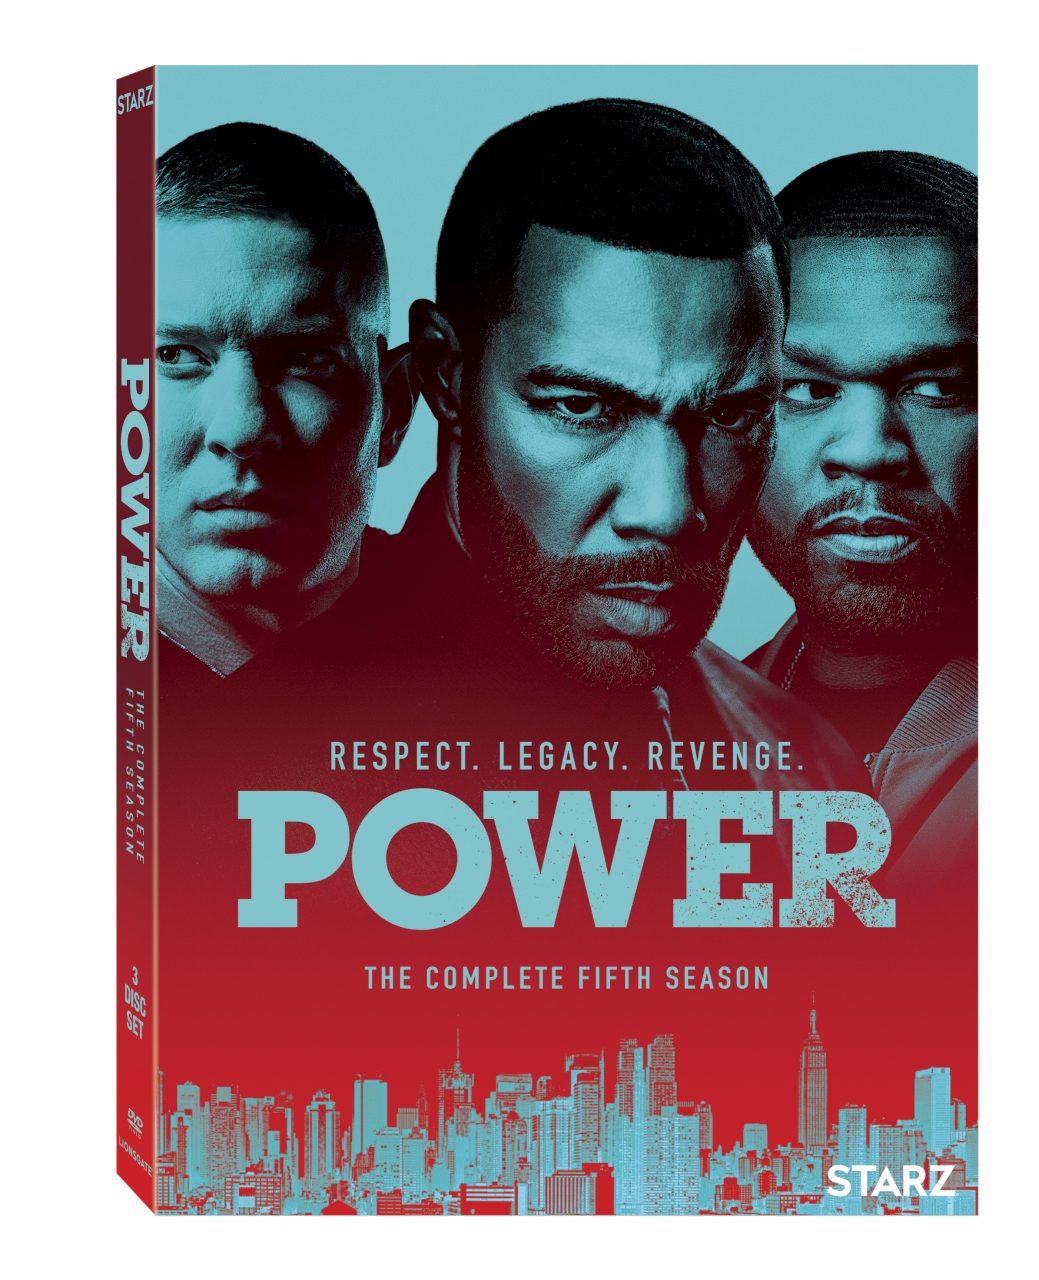 Power: The Complete Fifth Season DVD cover (Lionsgate Home Entertainment)